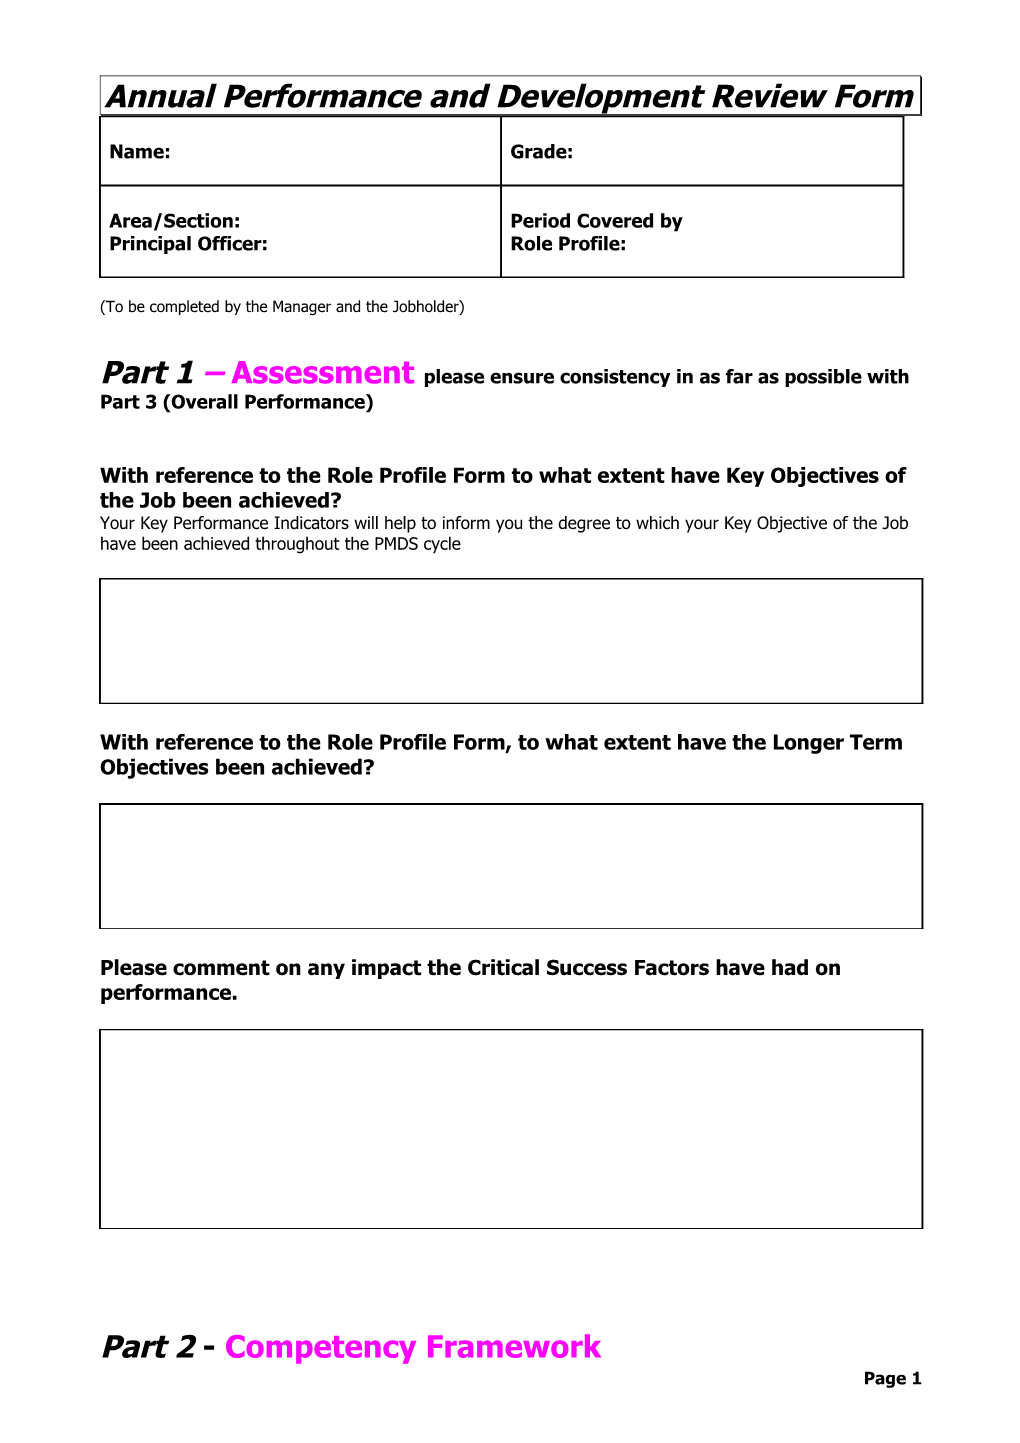 Annual Performance and Development Review Form